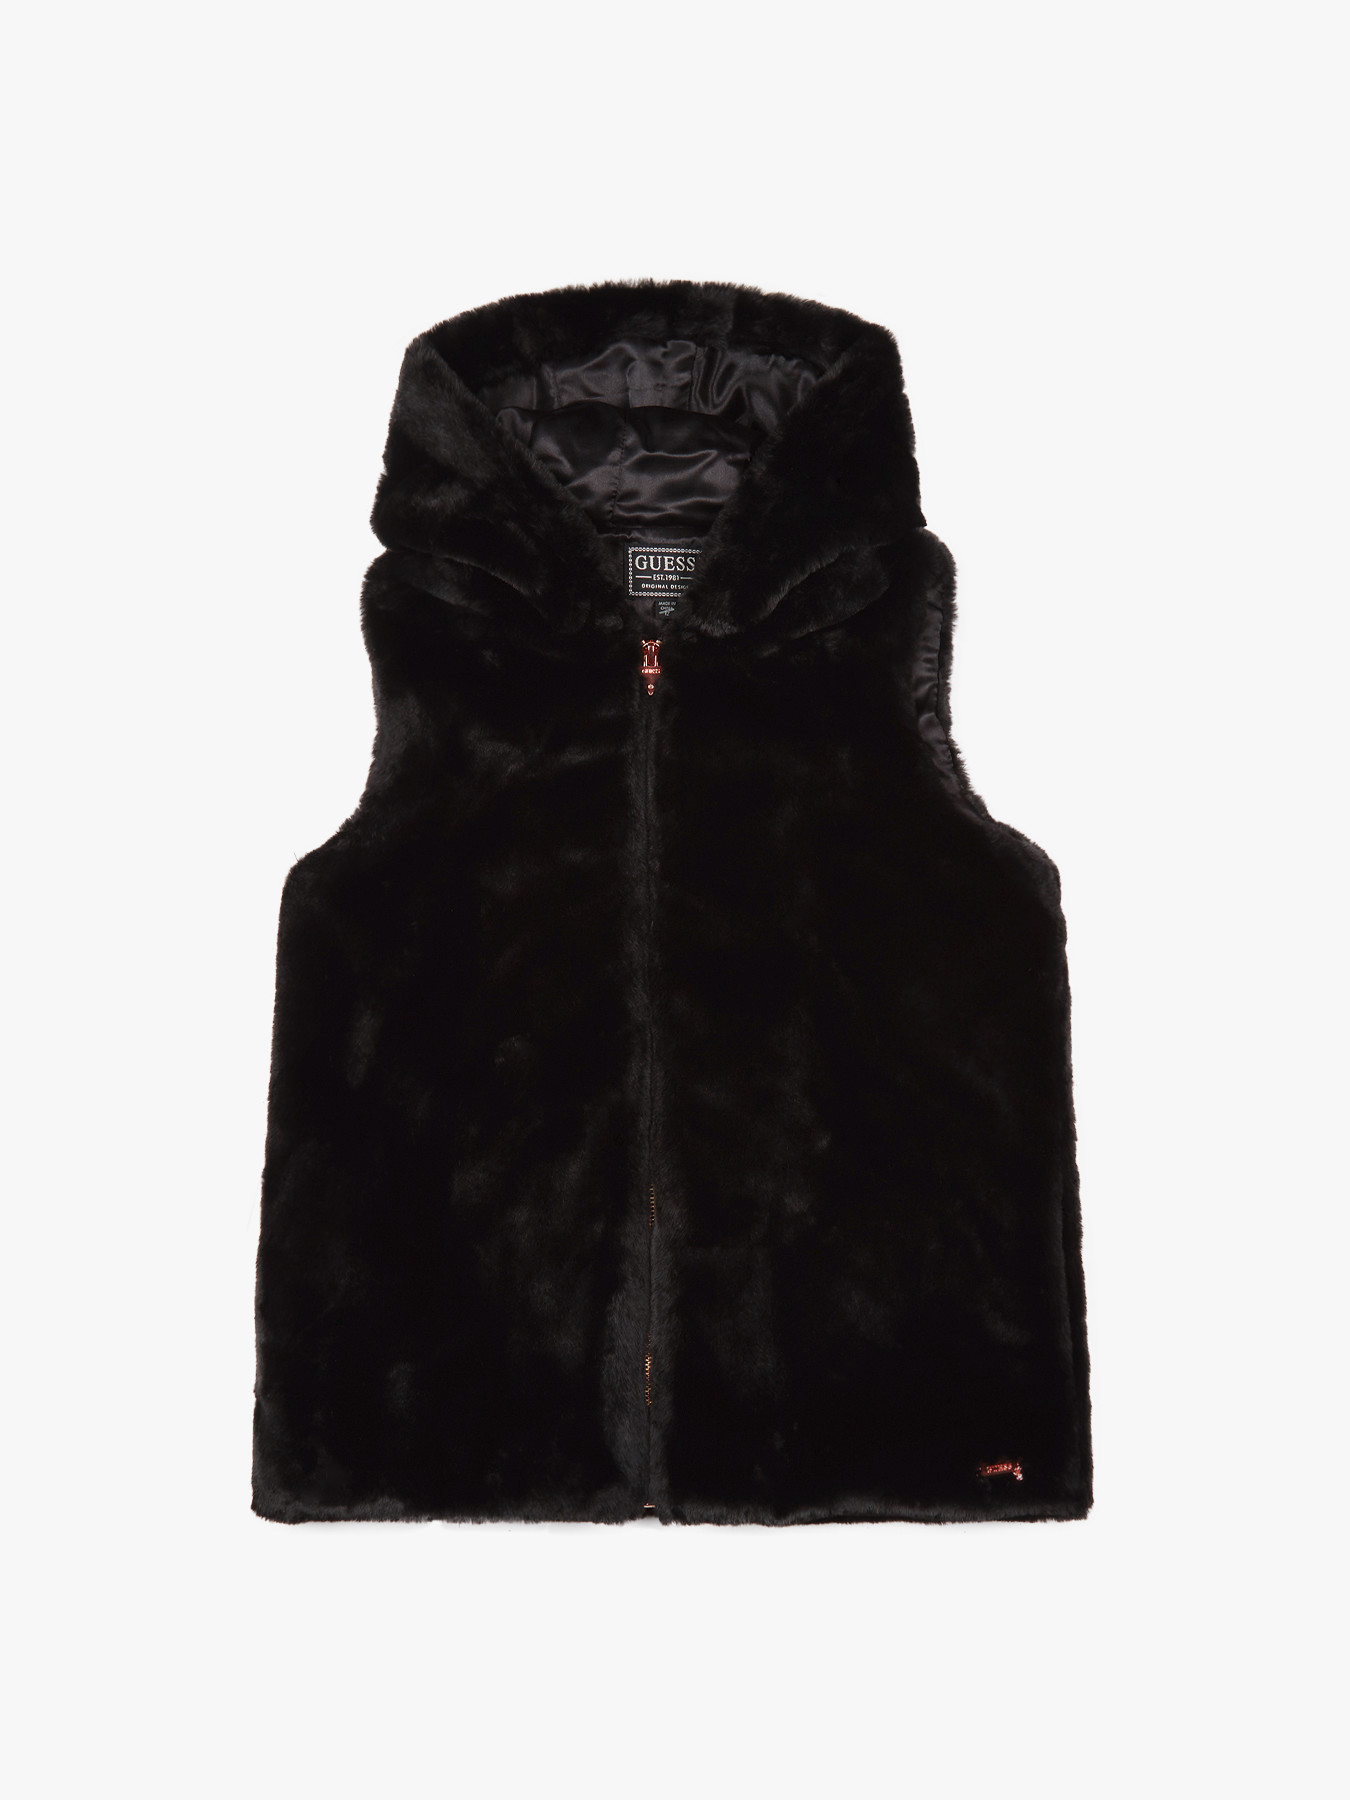 guess black jacket with fur